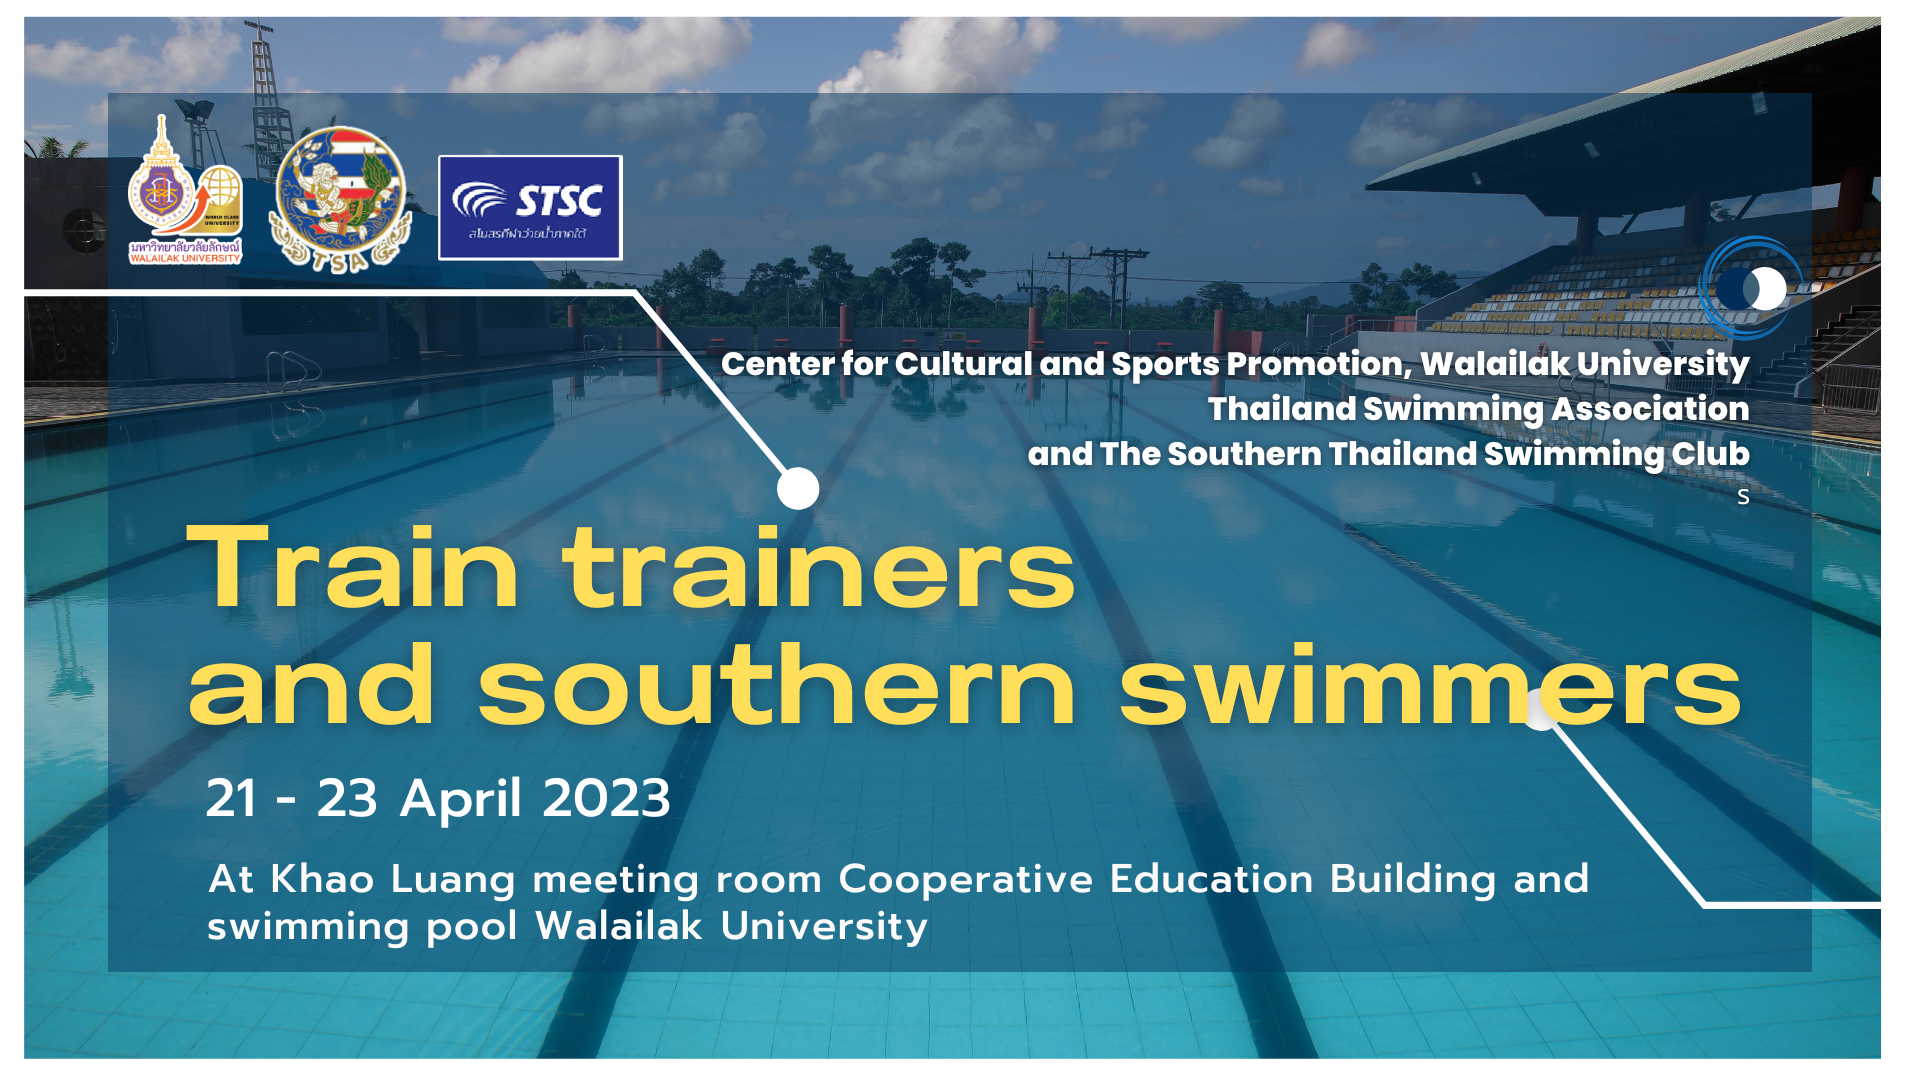 Training coaches and swimming athletes in the southern region